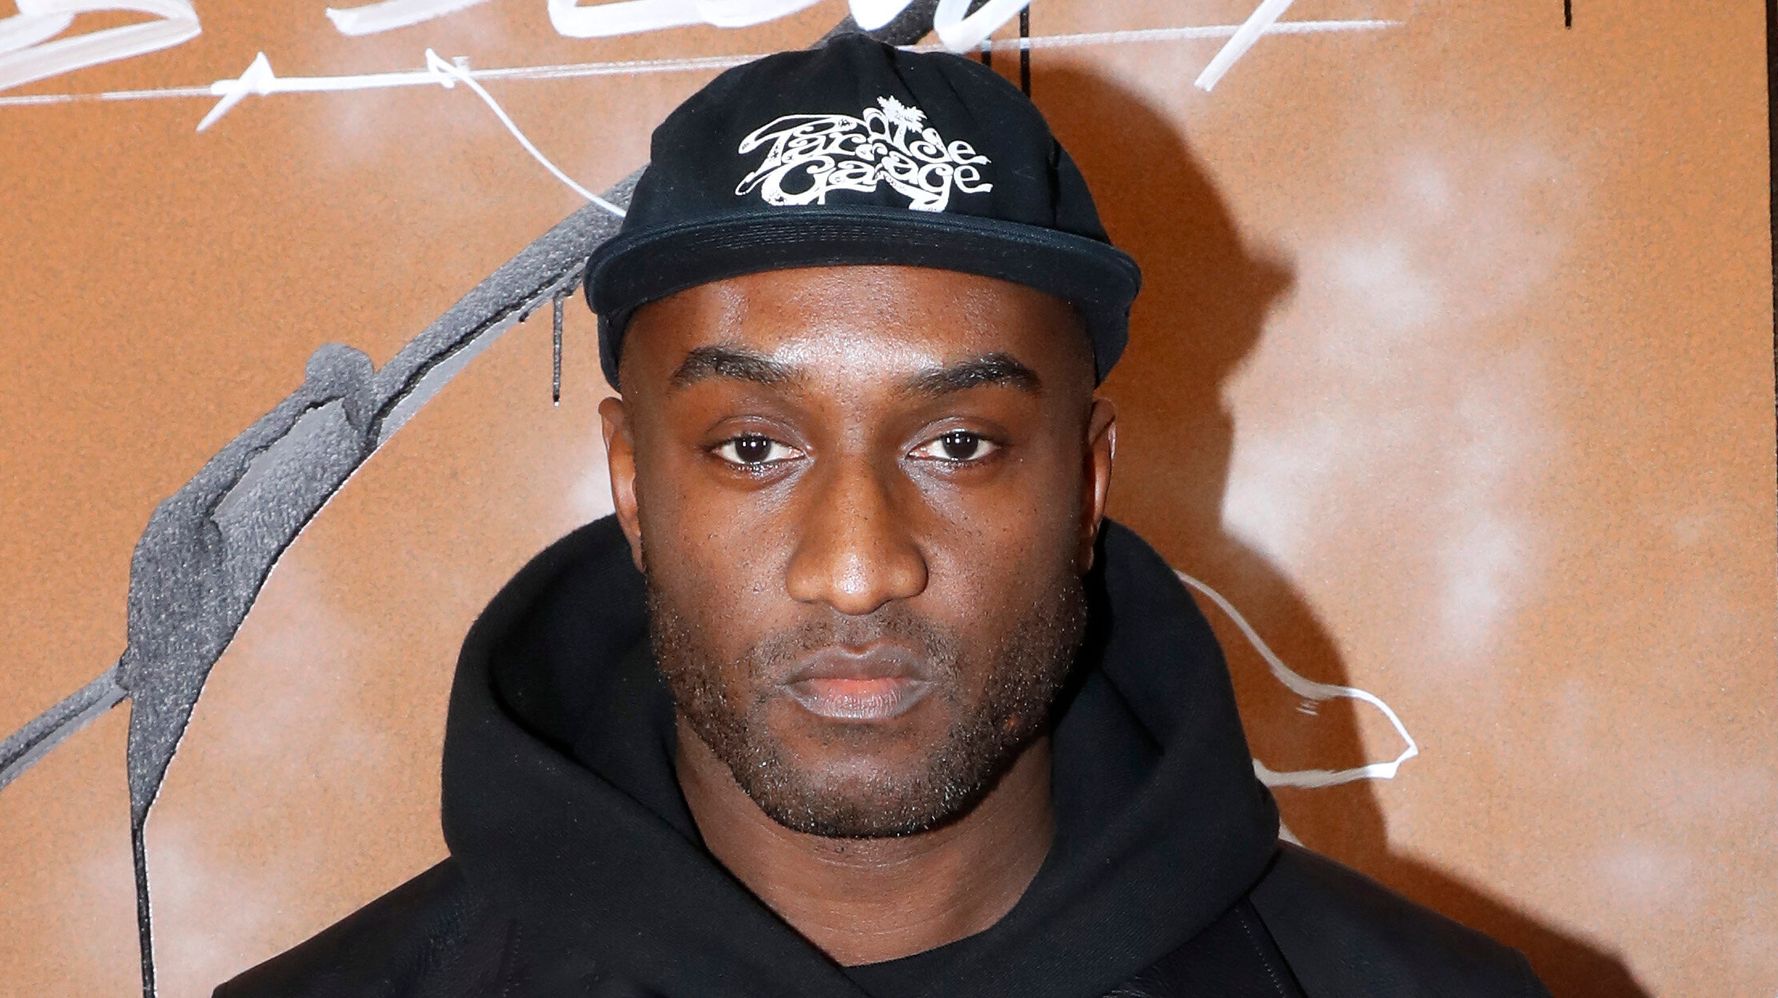 Virgil Abloh criticised for response to looting during George